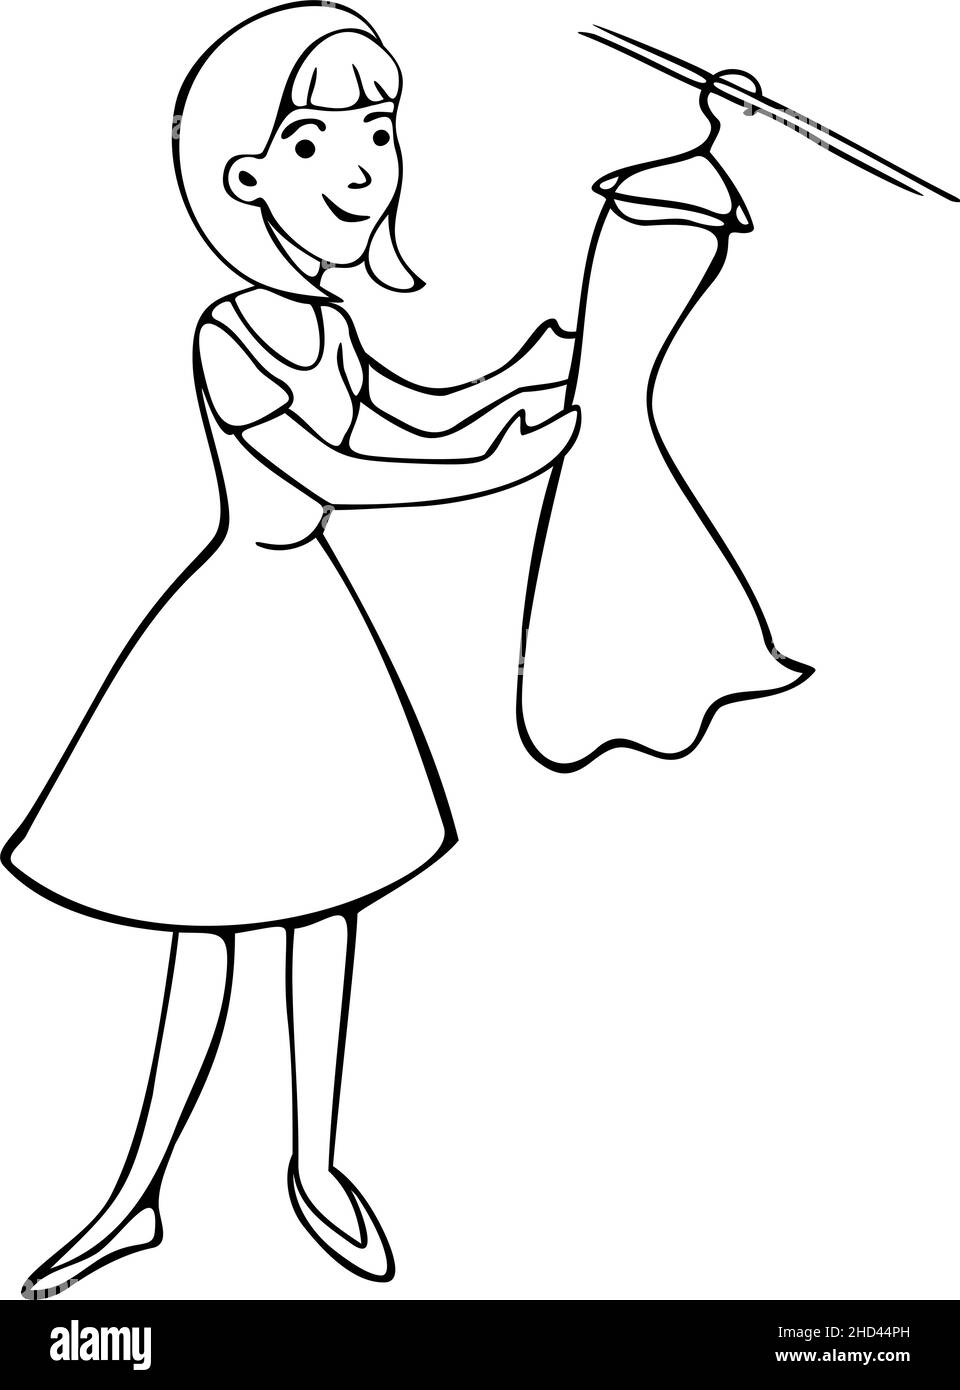 Vector illustration of girl with dress on hanger. Outline in cartoon style. Stock Vector